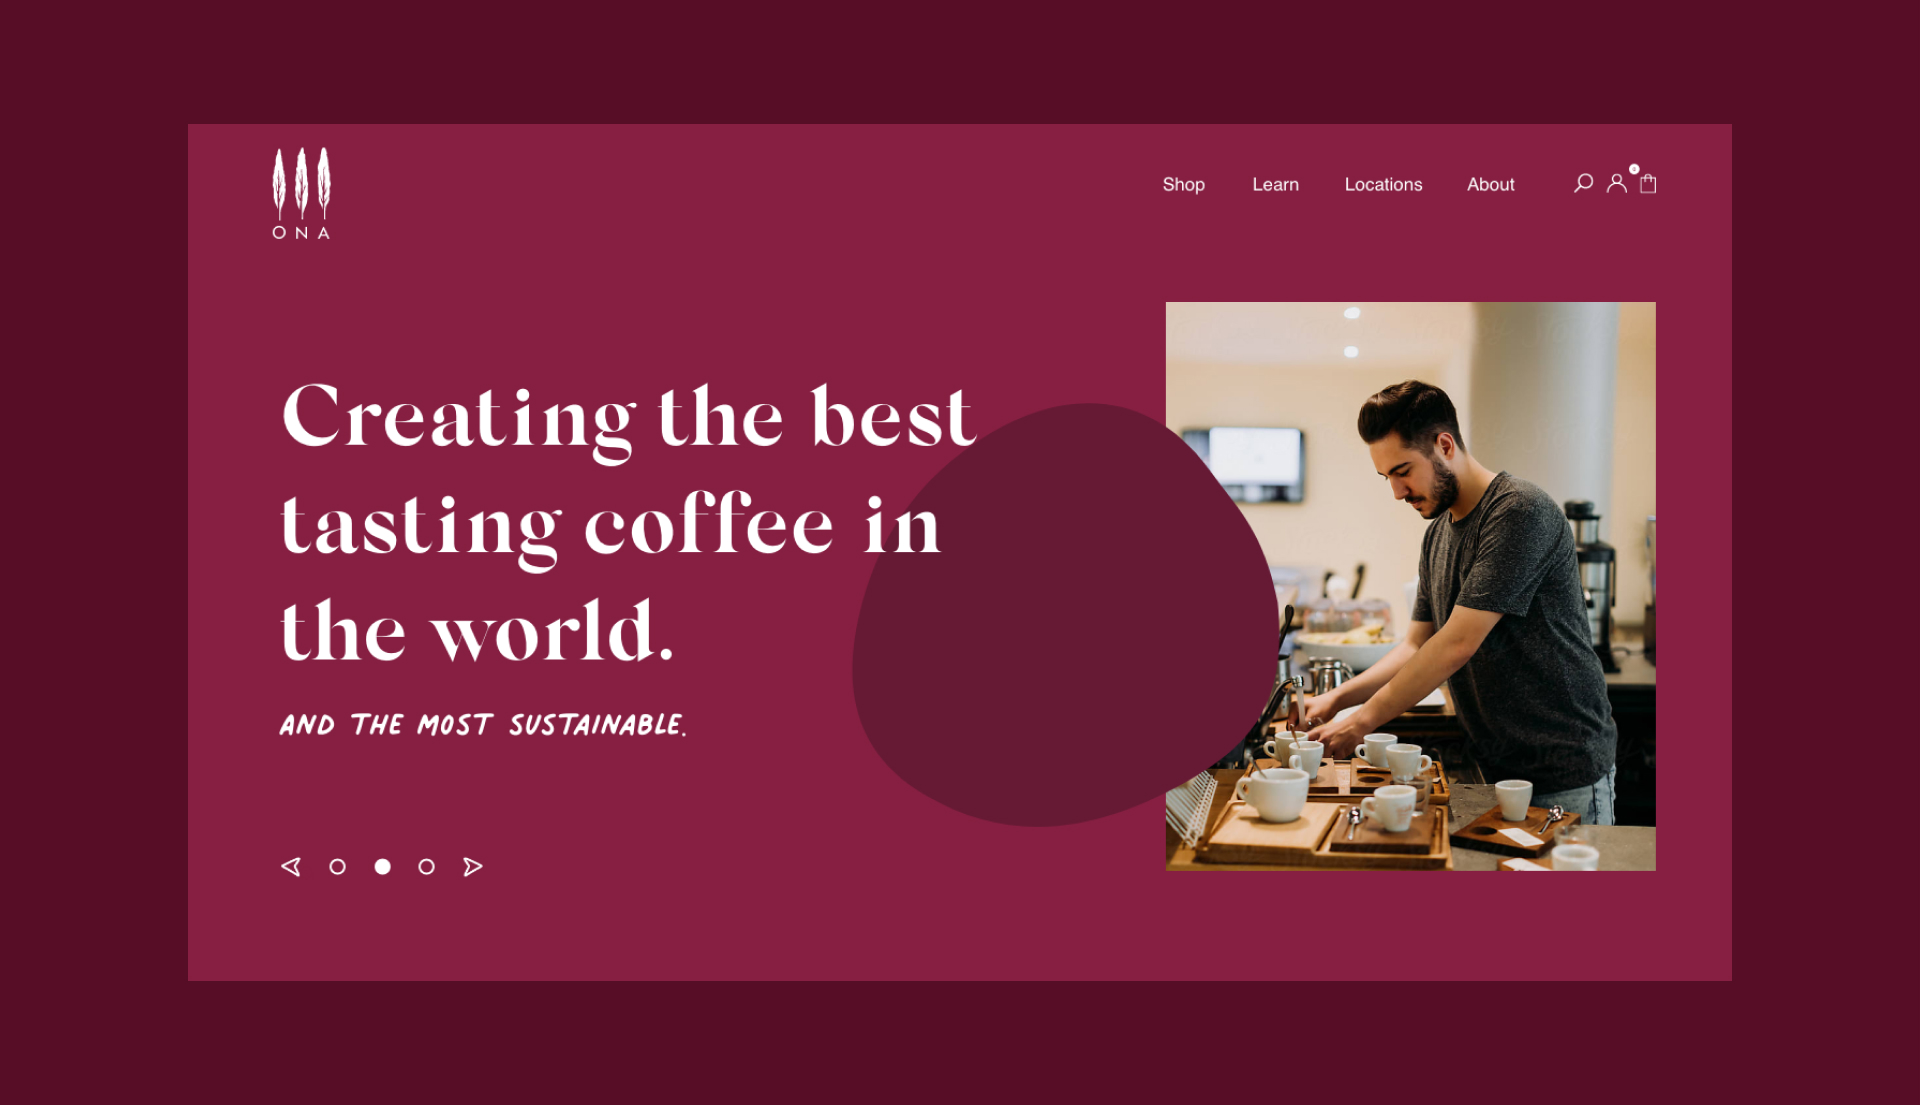 Flat design of the Ona Coffee homepage landing. Showing headline text which reads "Creating the. best tasting coffee in the world" as well as Ona logo, image and navigation menu.